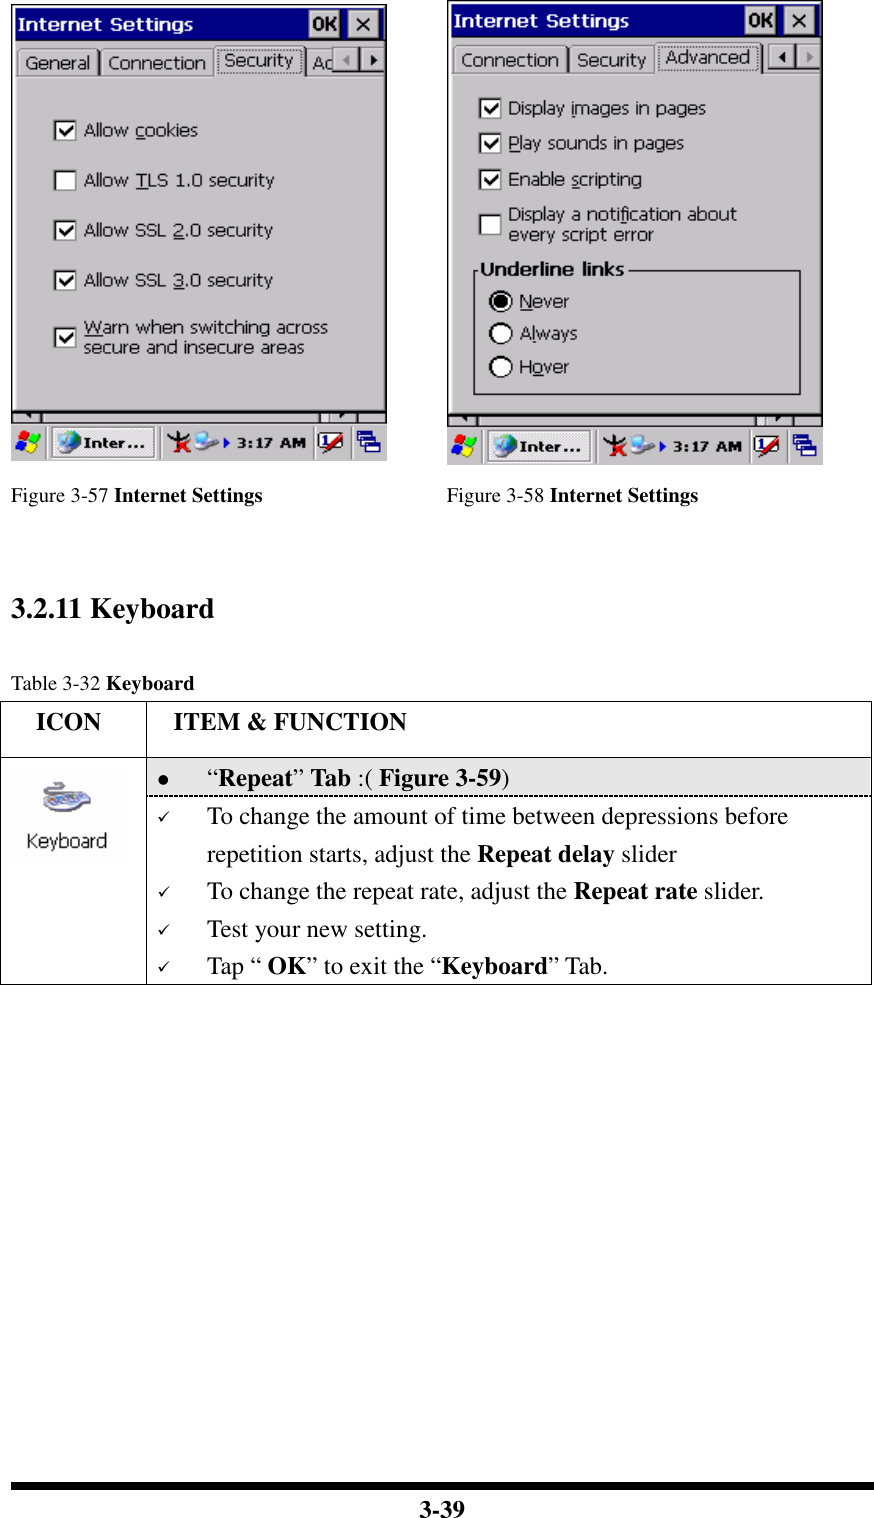  3-39   Figure 3-57 Internet Settings Figure 3-58 Internet Settings   3.2.11 Keyboard  Table 3-32 Keyboard     ICON  ITEM &amp; FUNCTION  “Repeat” Tab :( Figure 3-59)    To change the amount of time between depressions before repetition starts, adjust the Repeat delay slider  To change the repeat rate, adjust the Repeat rate slider.  Test your new setting.  Tap “ OK” to exit the “Keyboard” Tab. 